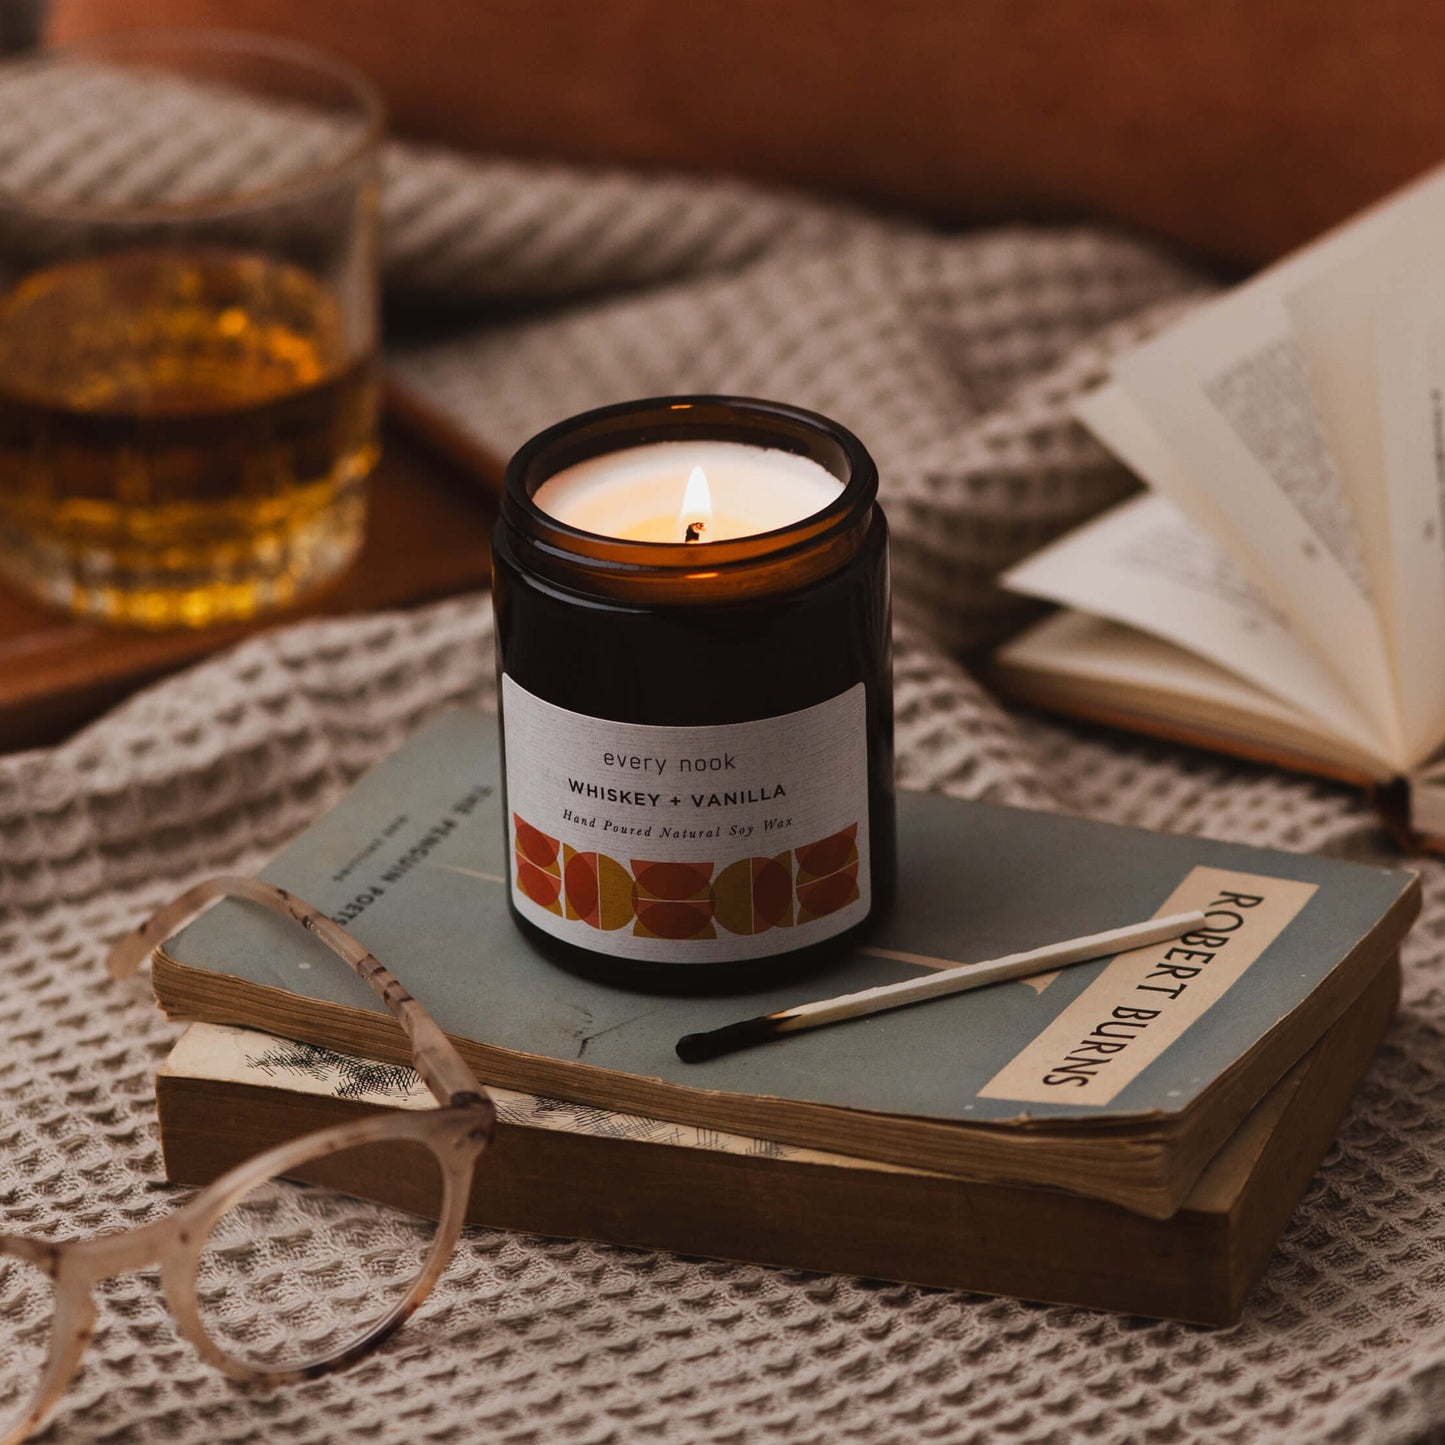 Whiskey + Vanilla scented candle